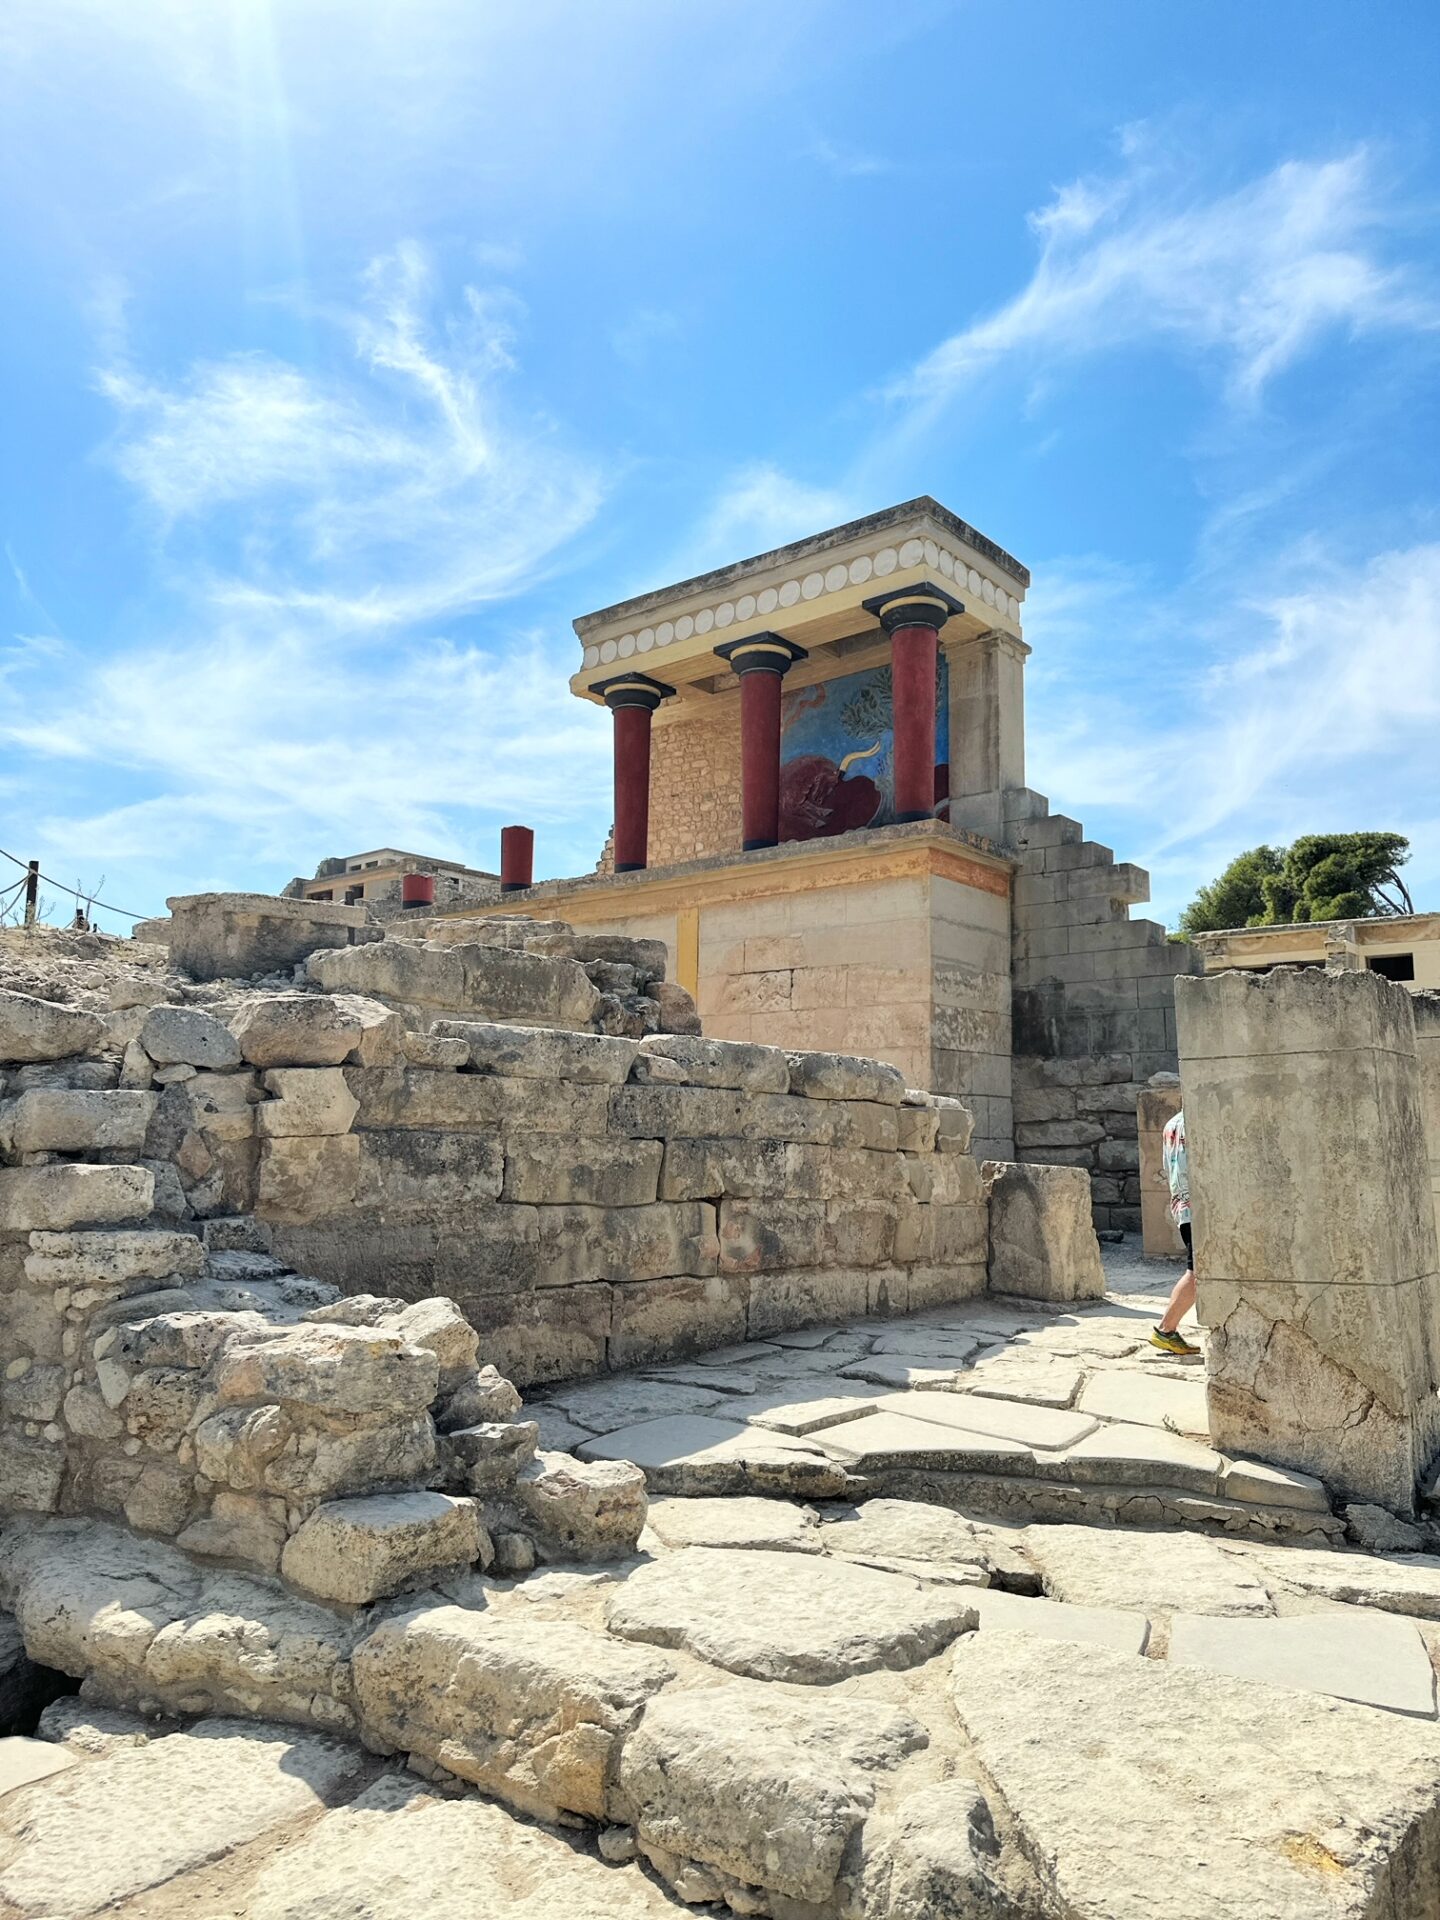 WHAT TO DO IN HERAKLION CITY